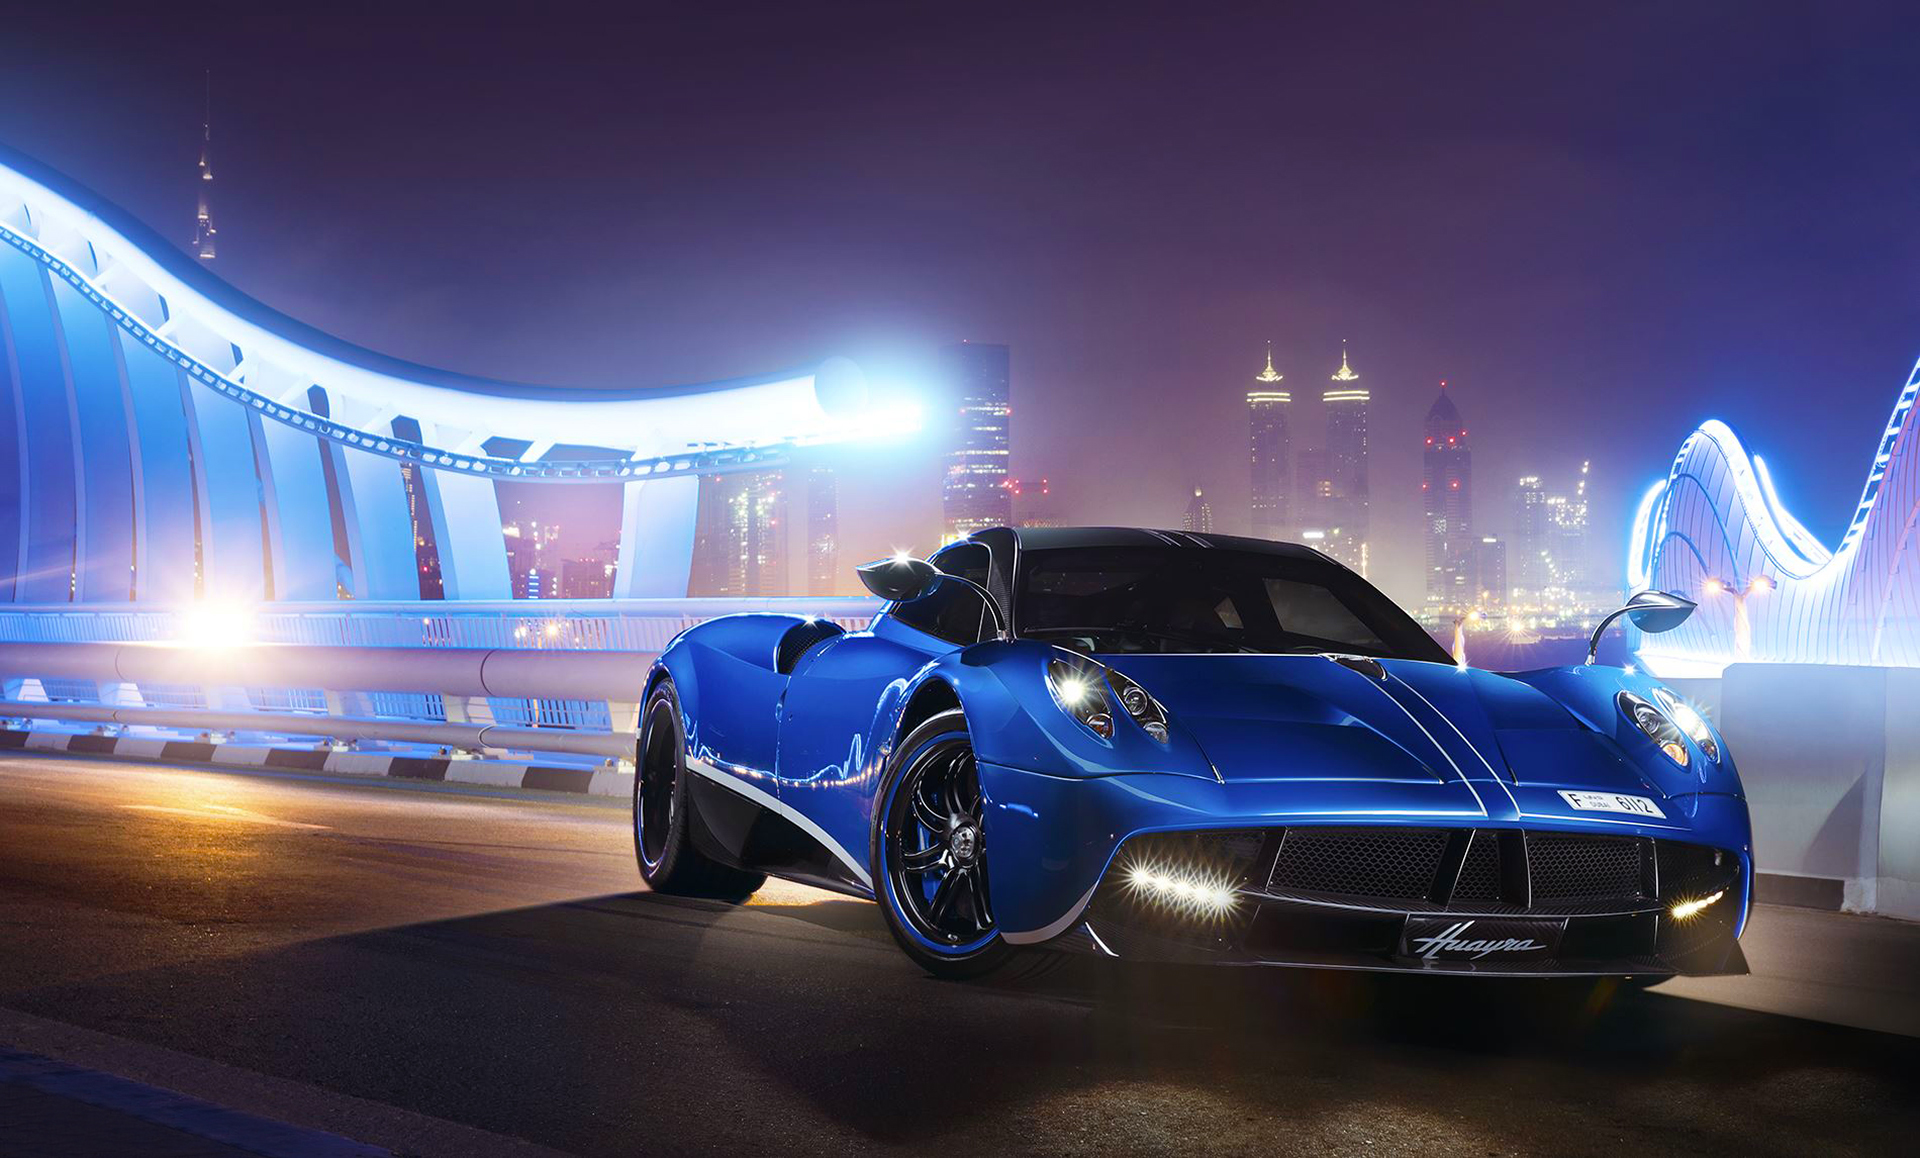 142401 Screensavers and Wallpapers Pagani for phone. Download night, pagani, cars, blue, front view, huayra pictures for free